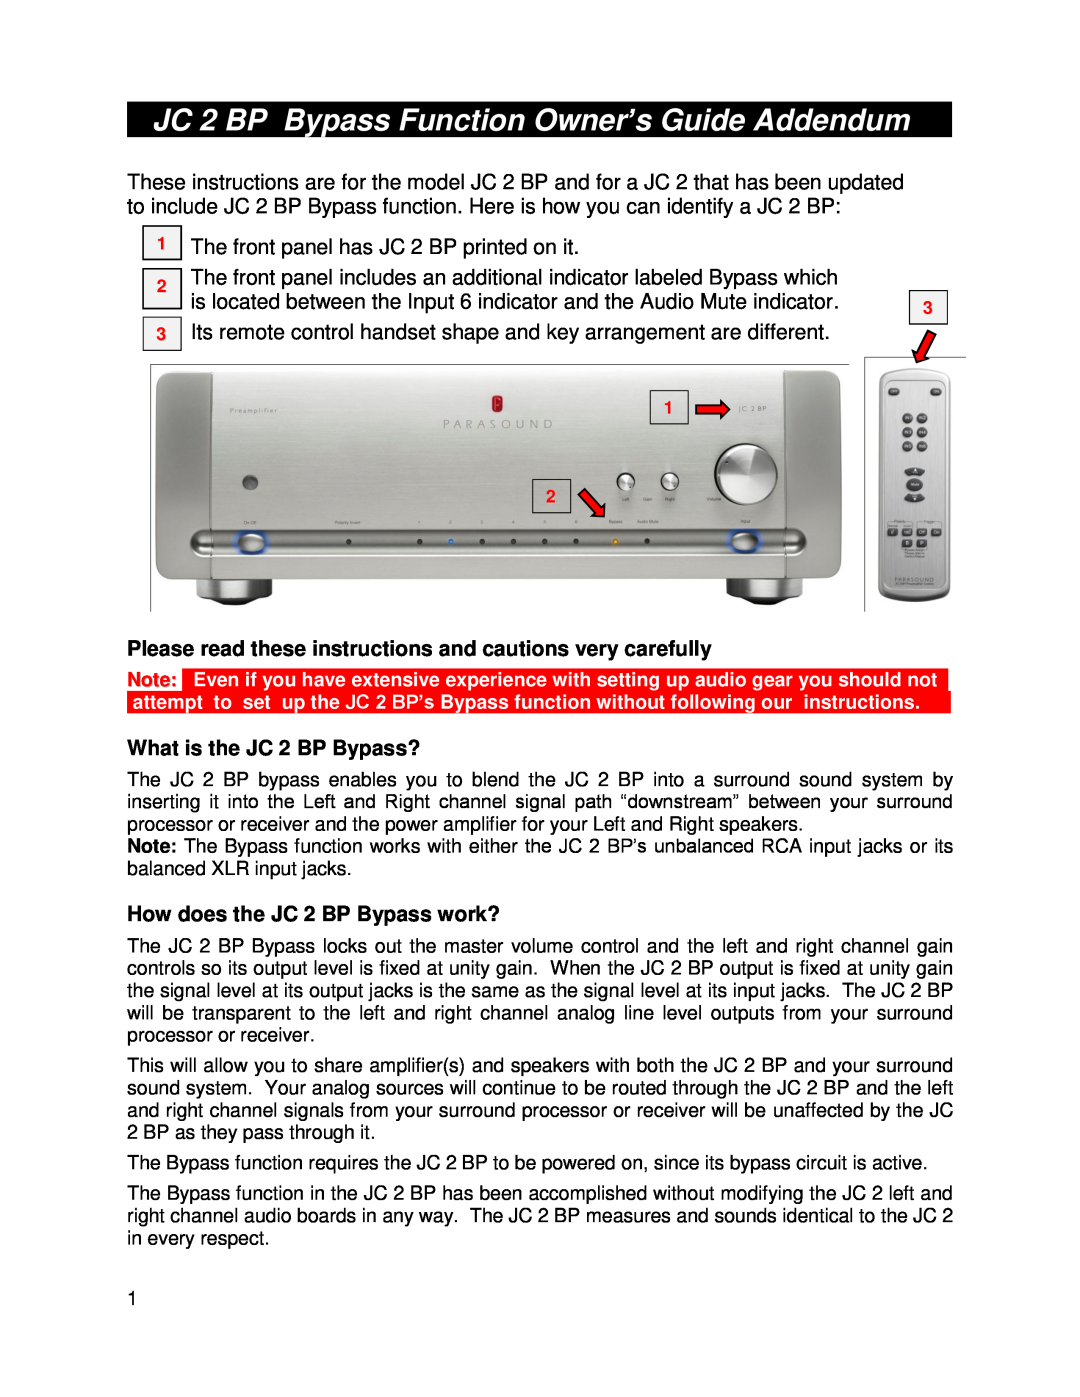 Parasound manual Please read these instructions and cautions very carefully, What is the JC 2 BP Bypass? 